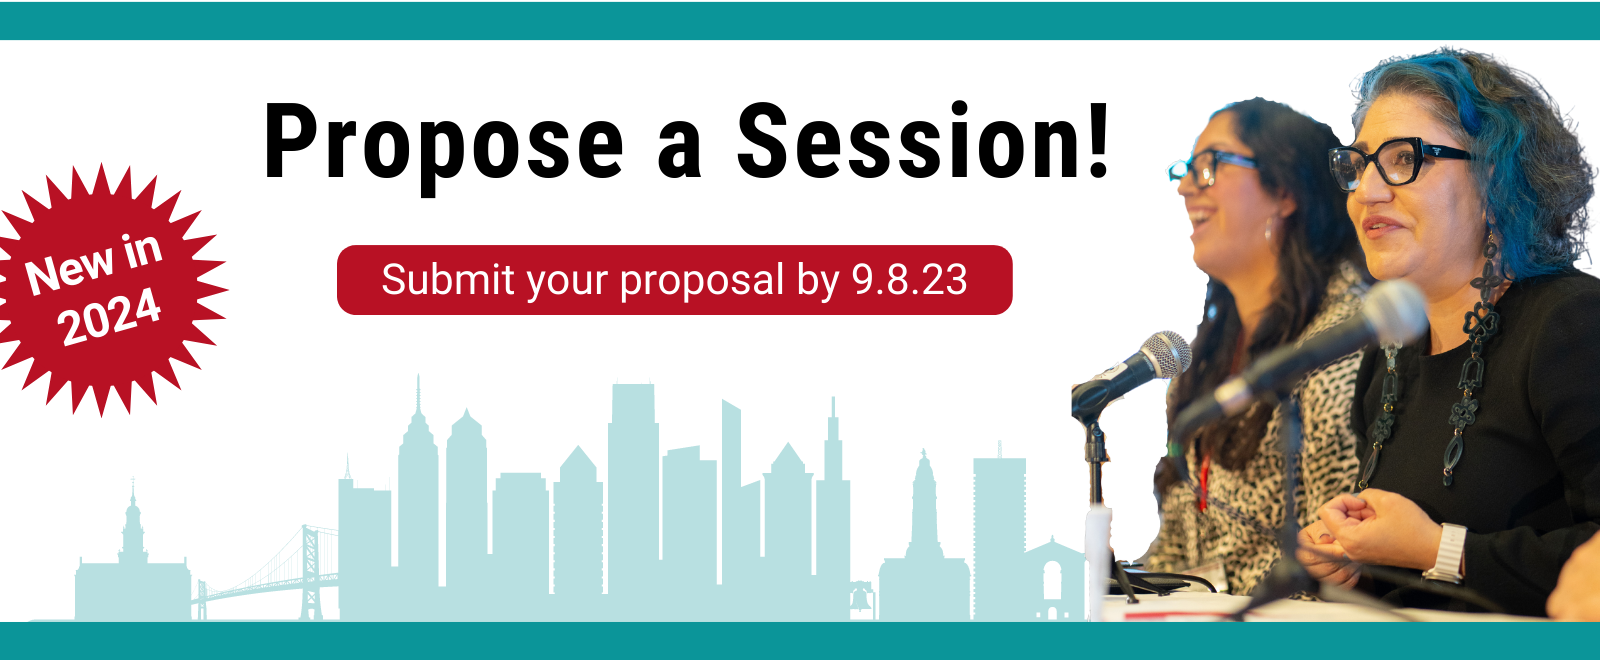 Graphic with text - New in 2024!  Propose a Session. A photo is incorporated on the right showing two women with microphones smiling